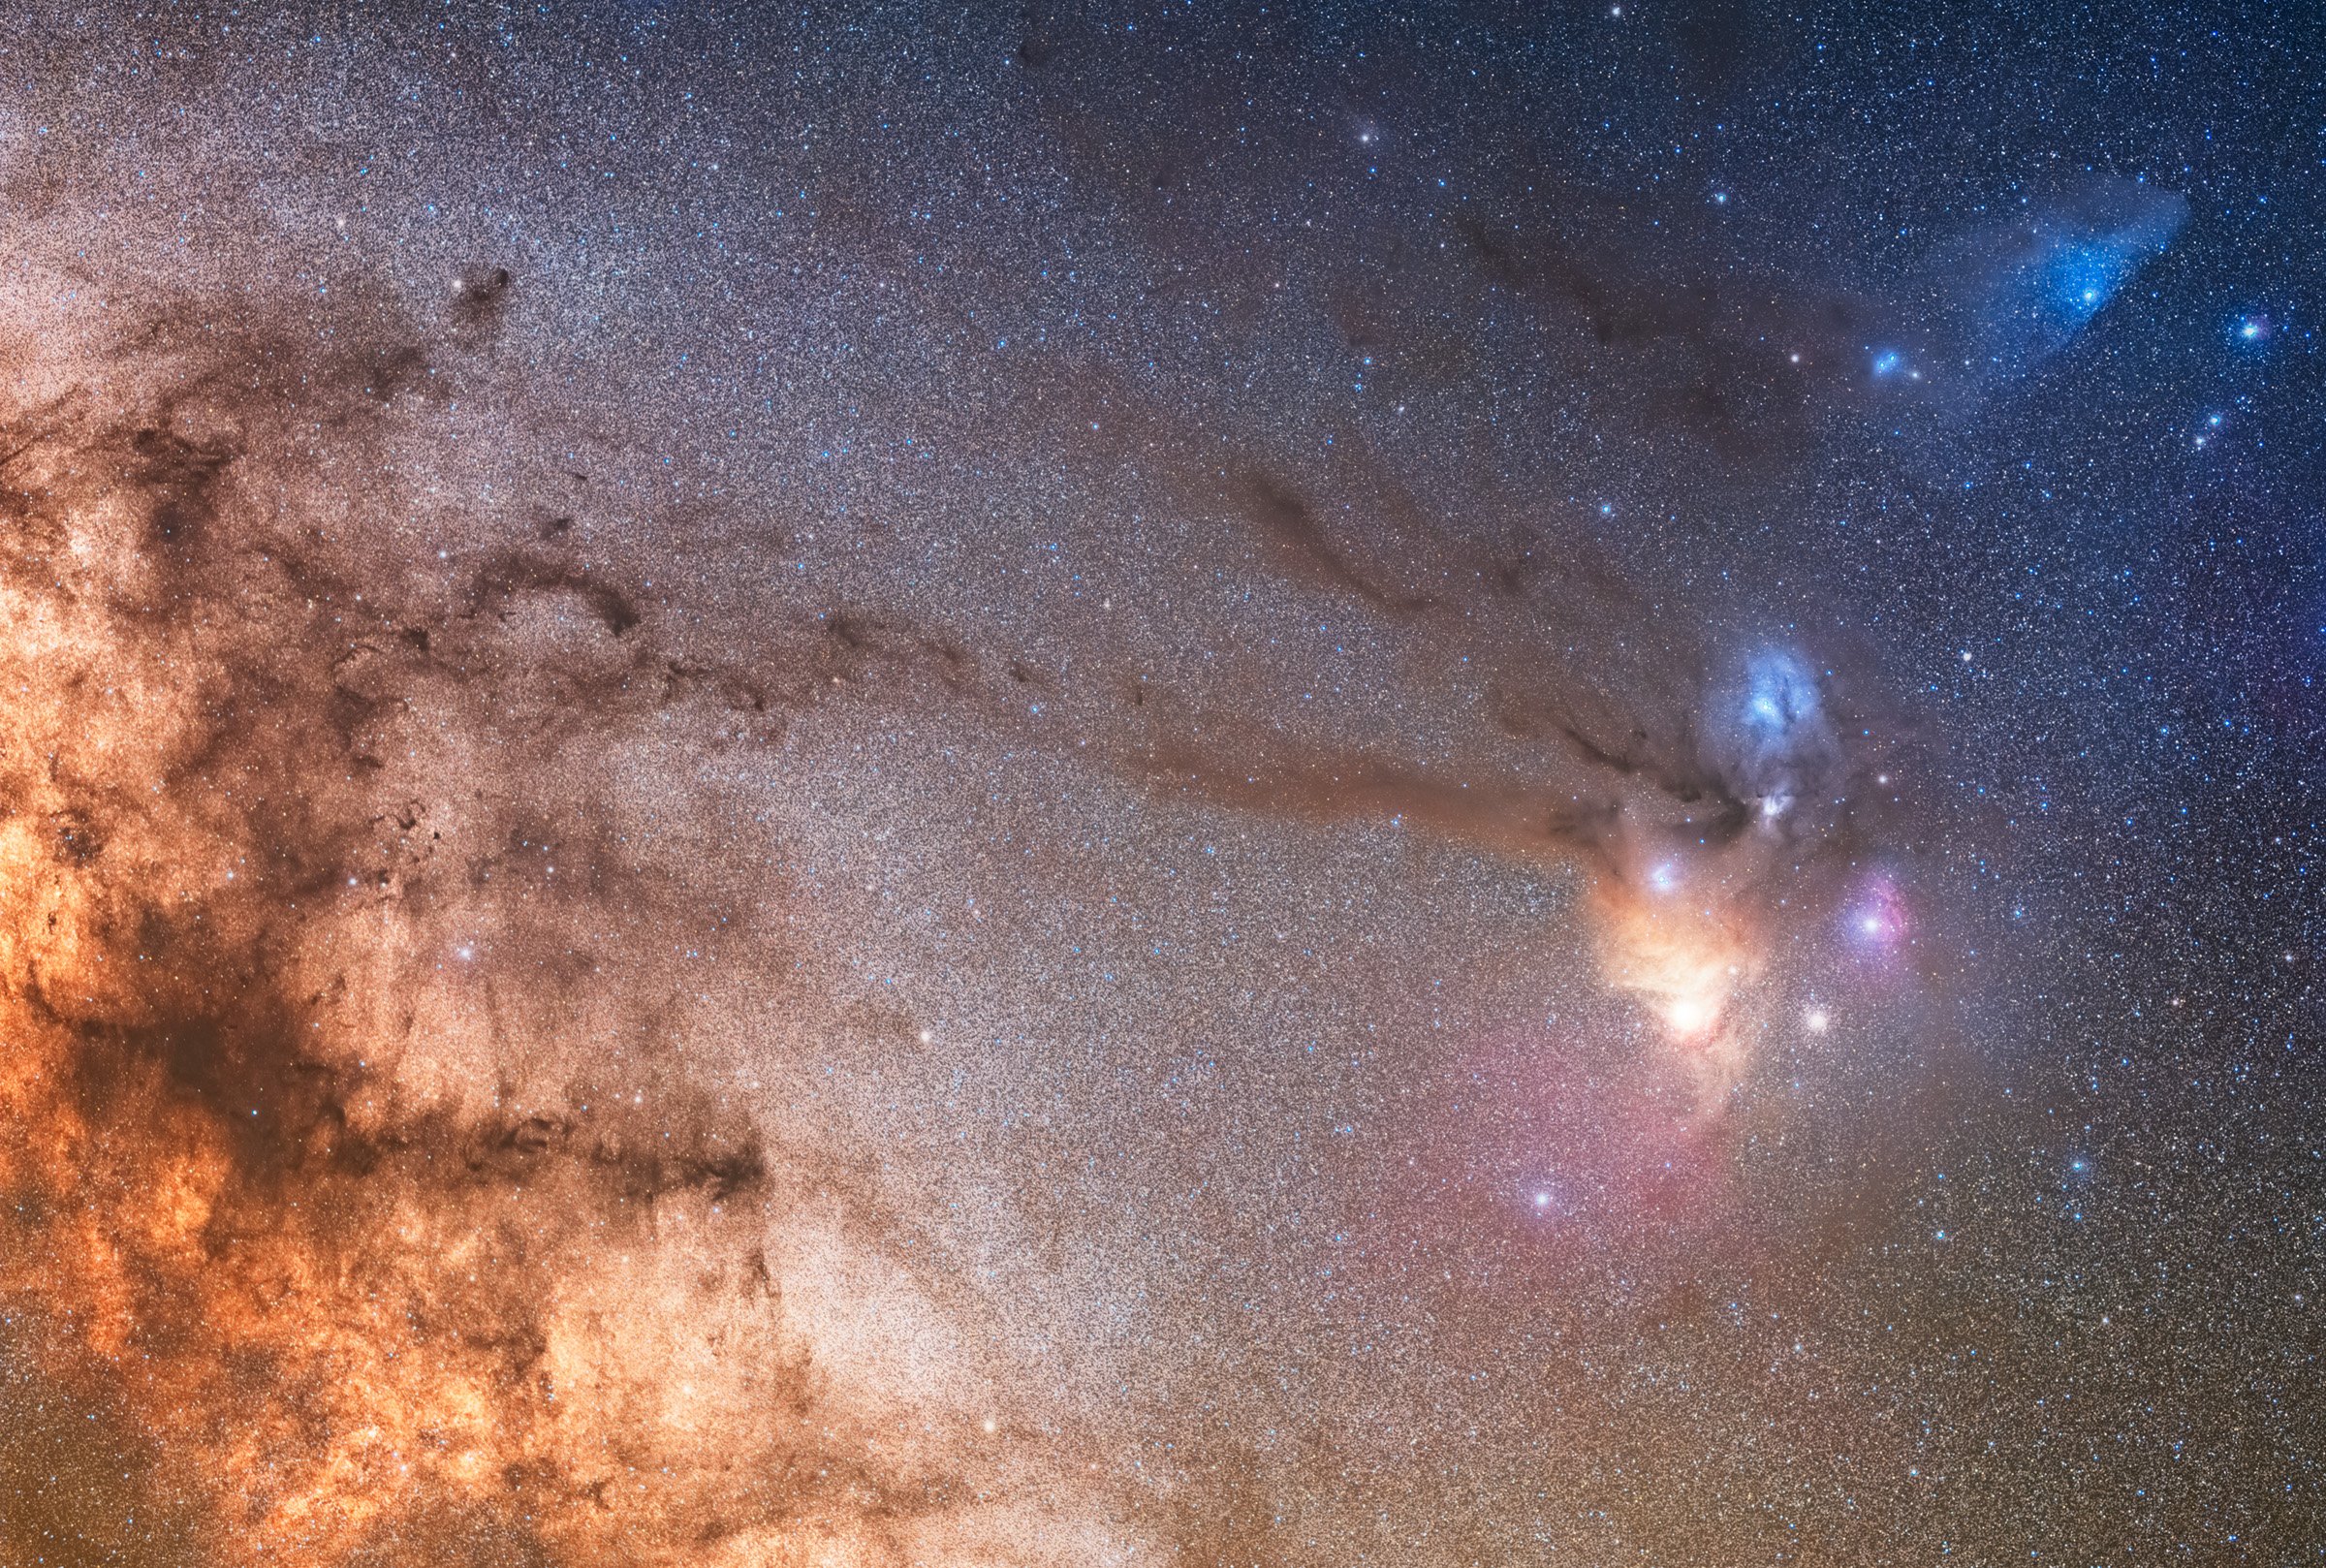 A Study of the Rho Ophiuchus area with 85mm lens